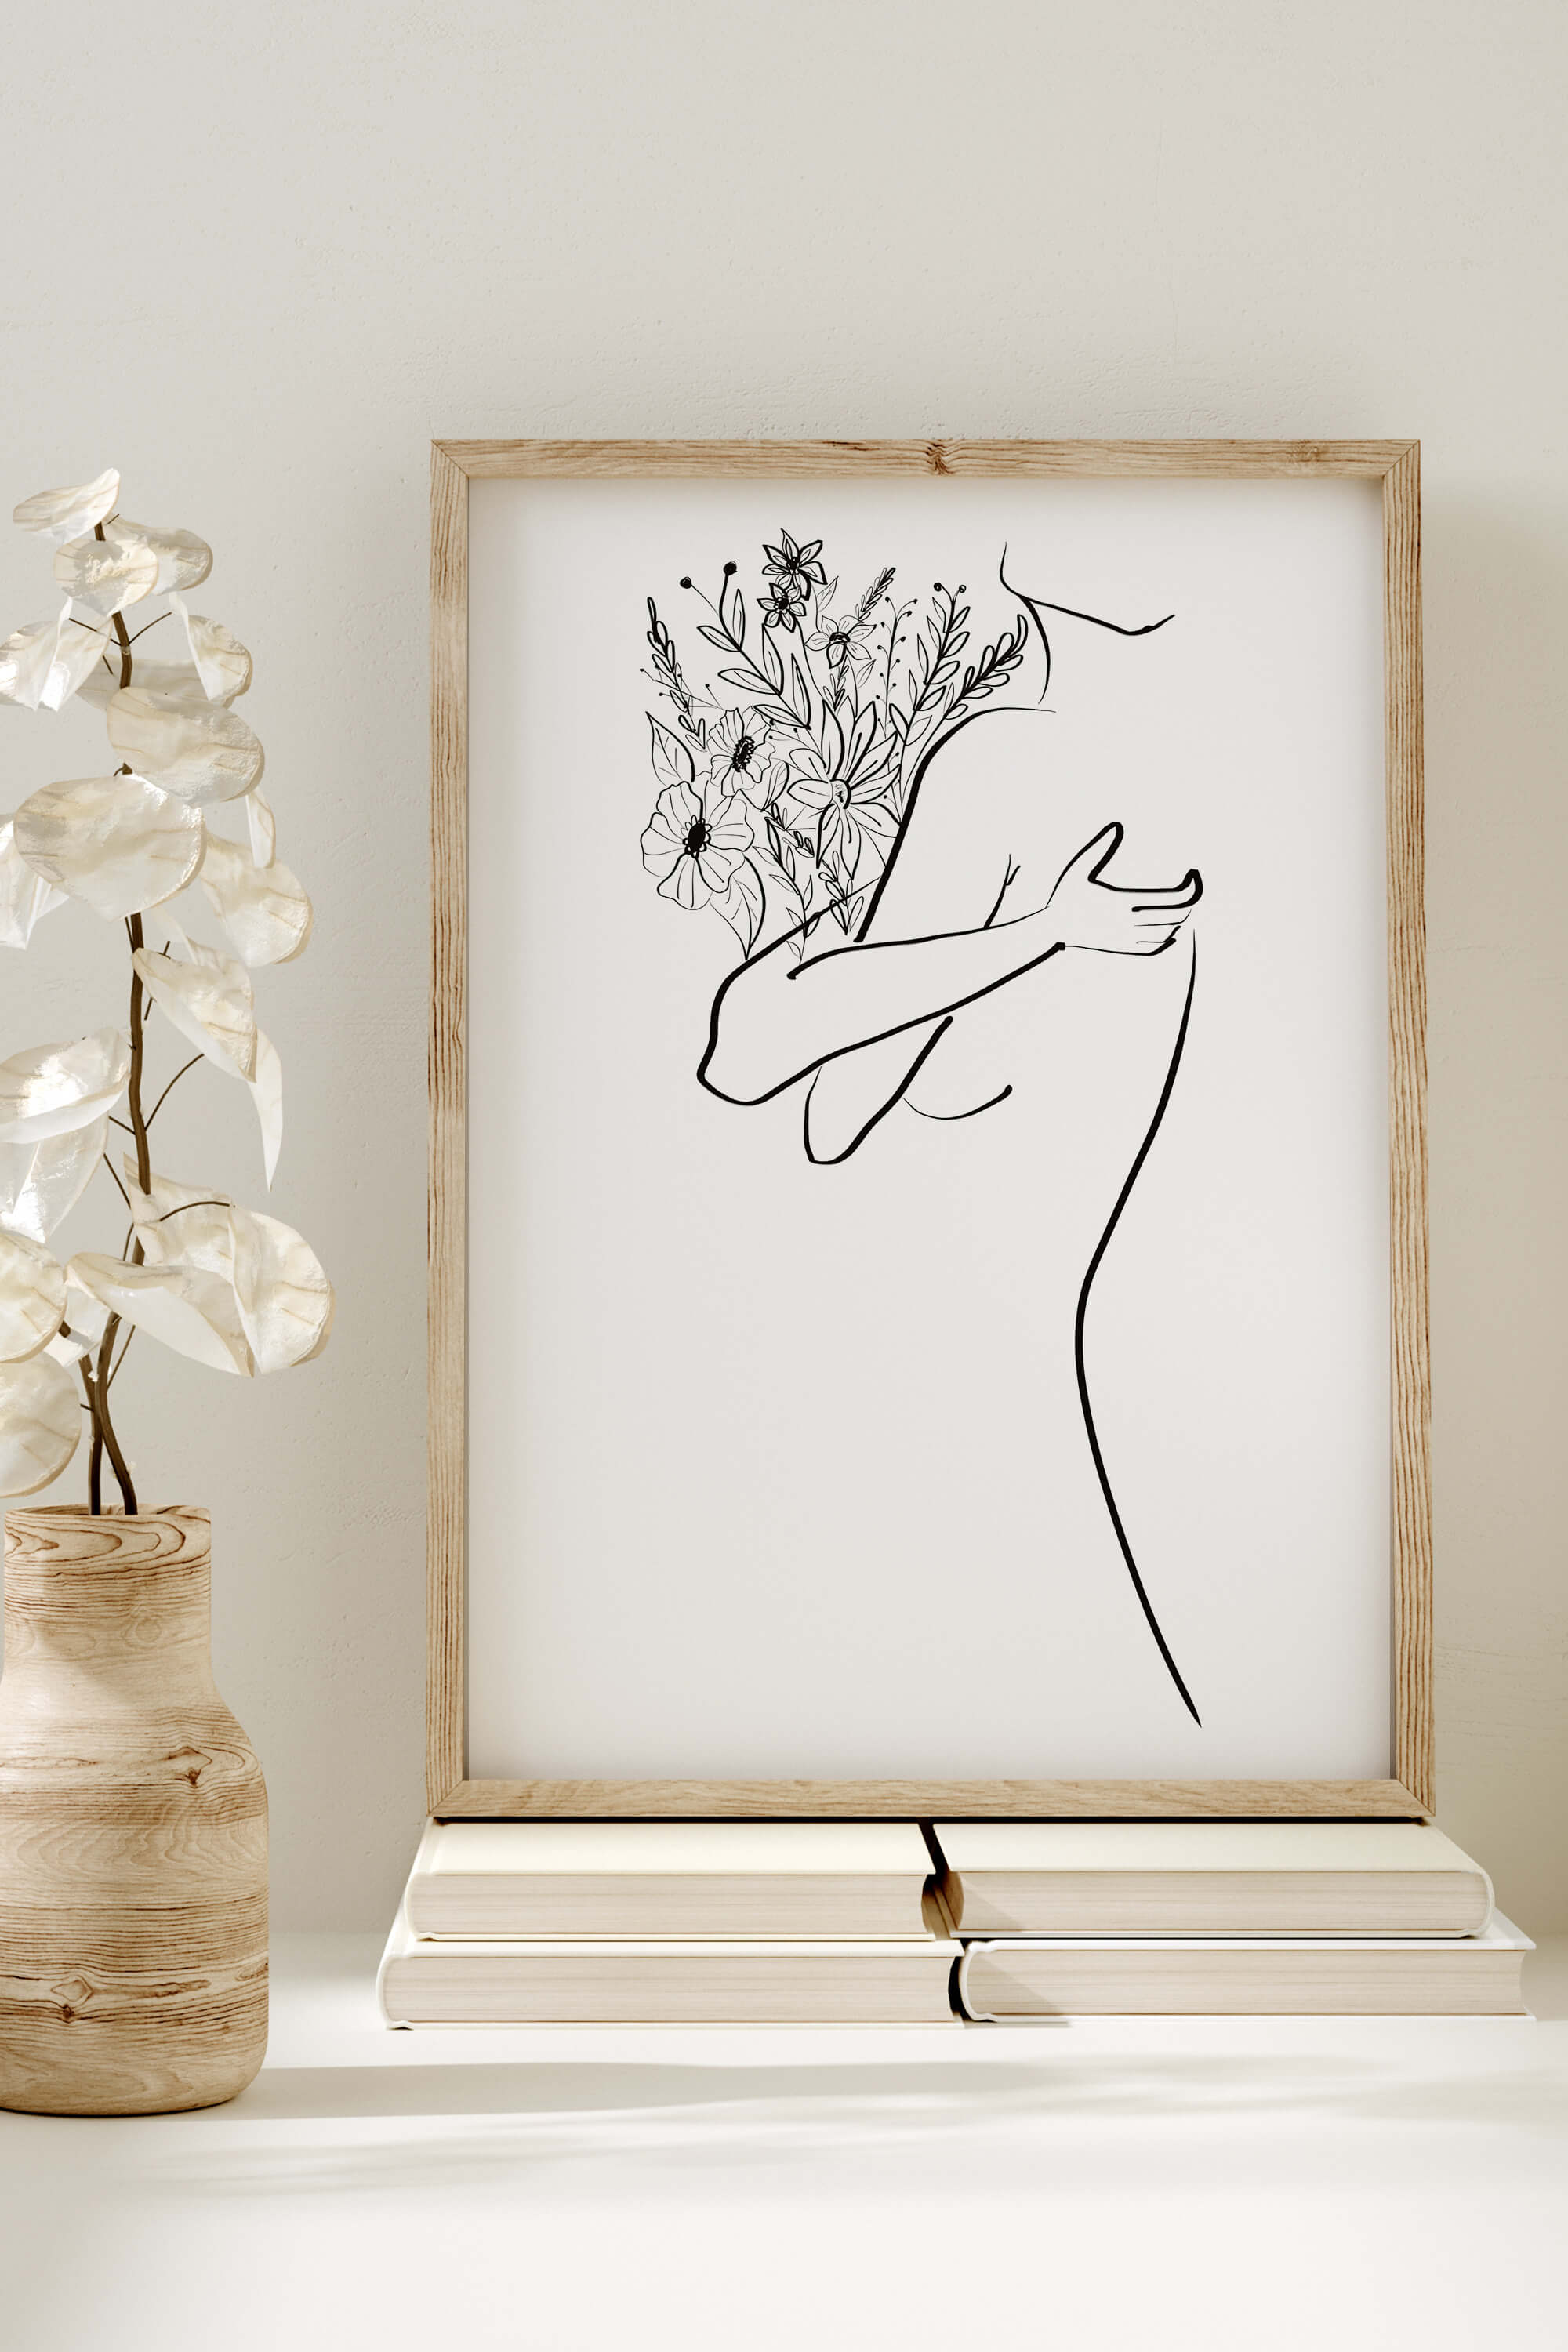 Feminist poster depicting a strong woman in black and white art. The empowering line drawing celebrates individuality and power. Perfect for those who appreciate bold expressions and want to make a statement with their art.